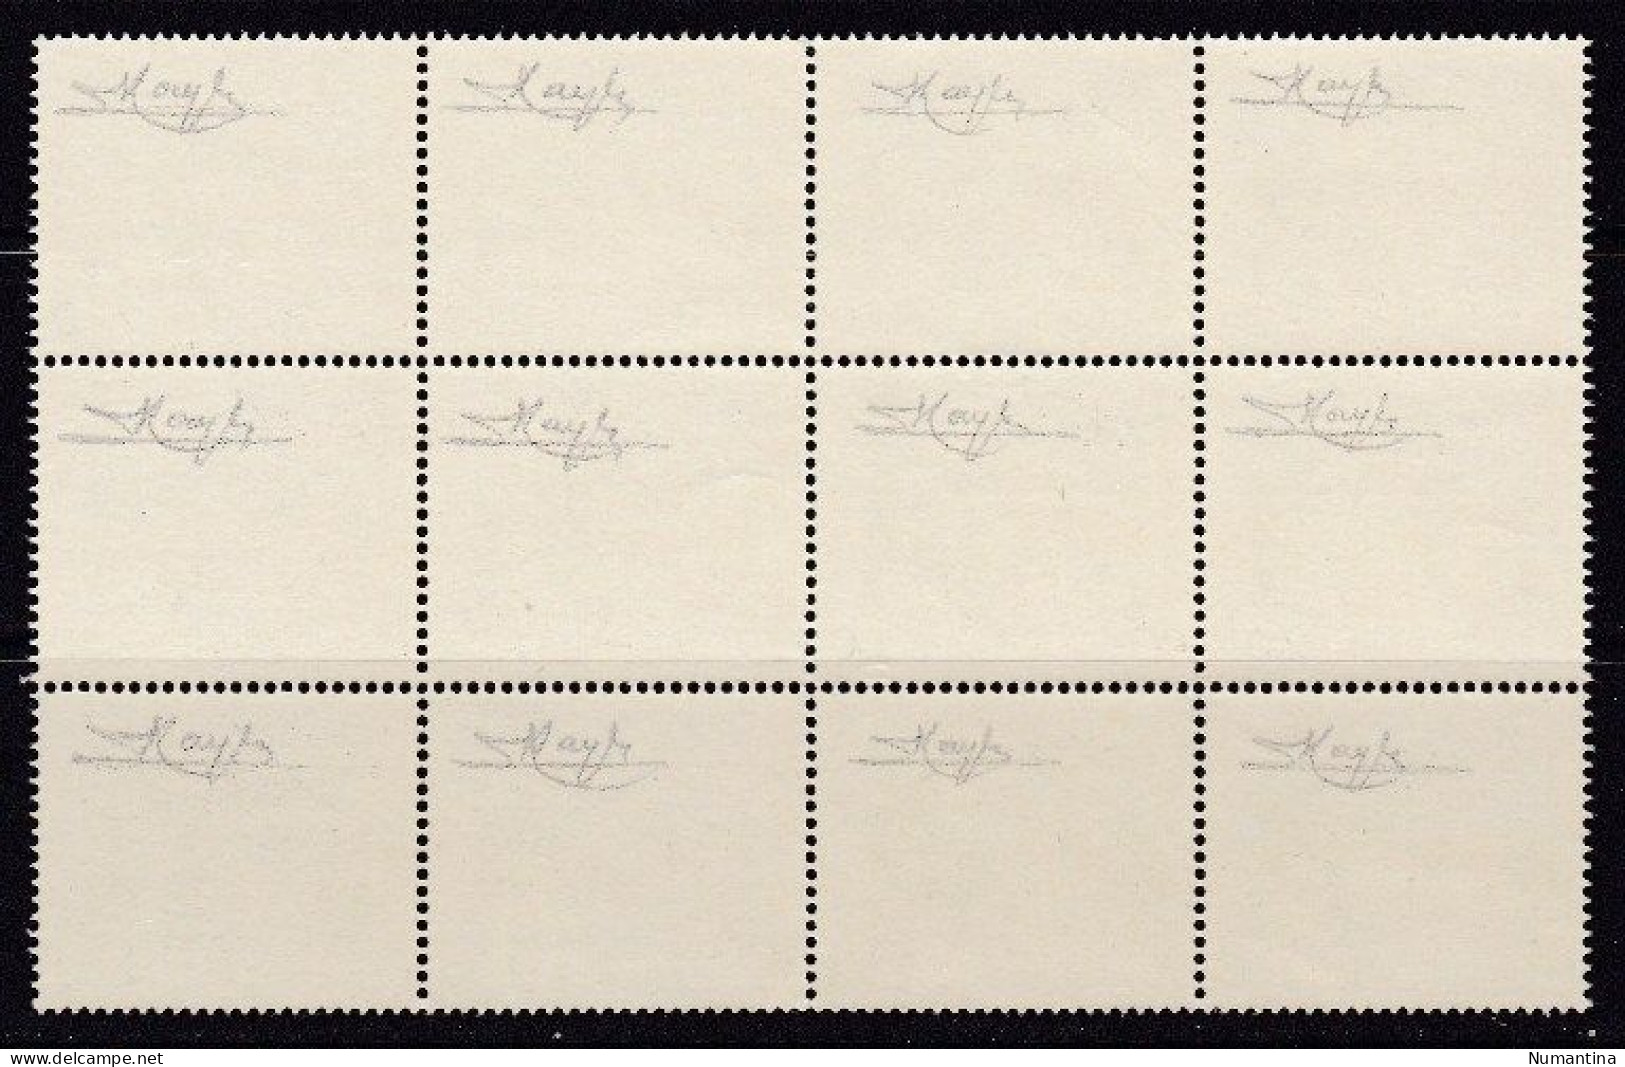 1975 Portugal - Yvert 1265a - B12 - Fosforo - MNH - Valor 96 € - Firmados - Unused Stamps